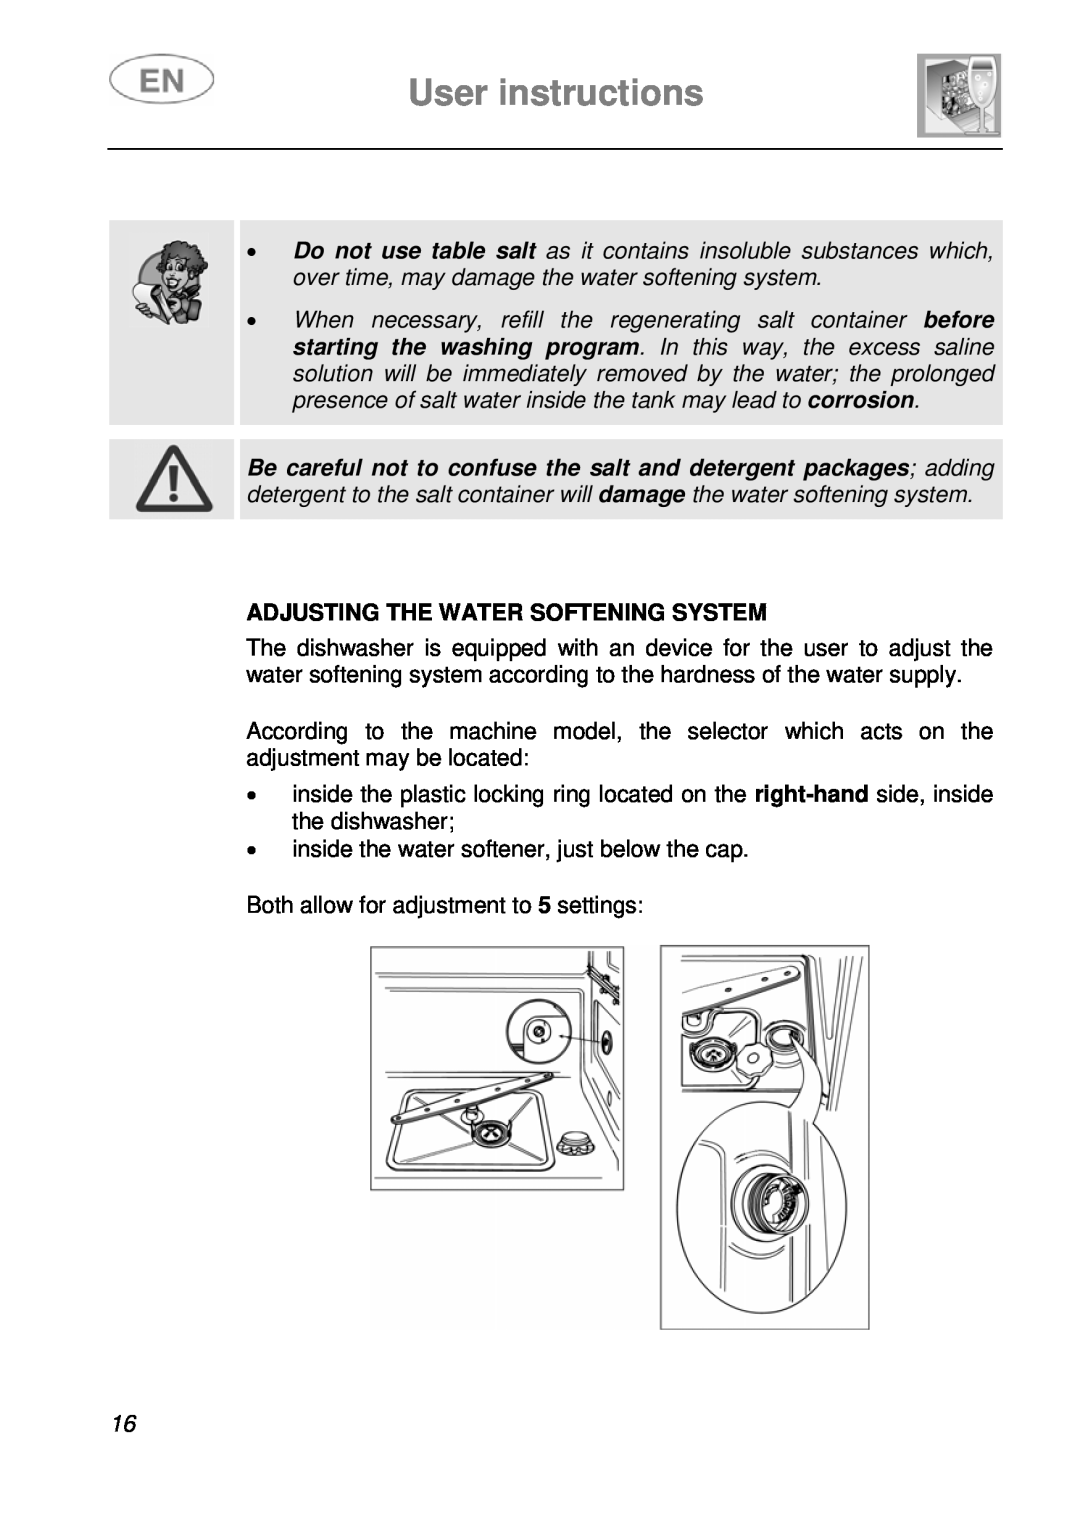 Smeg STA6246, STA6245 instruction manual User instructions, Adjusting The Water Softening System 